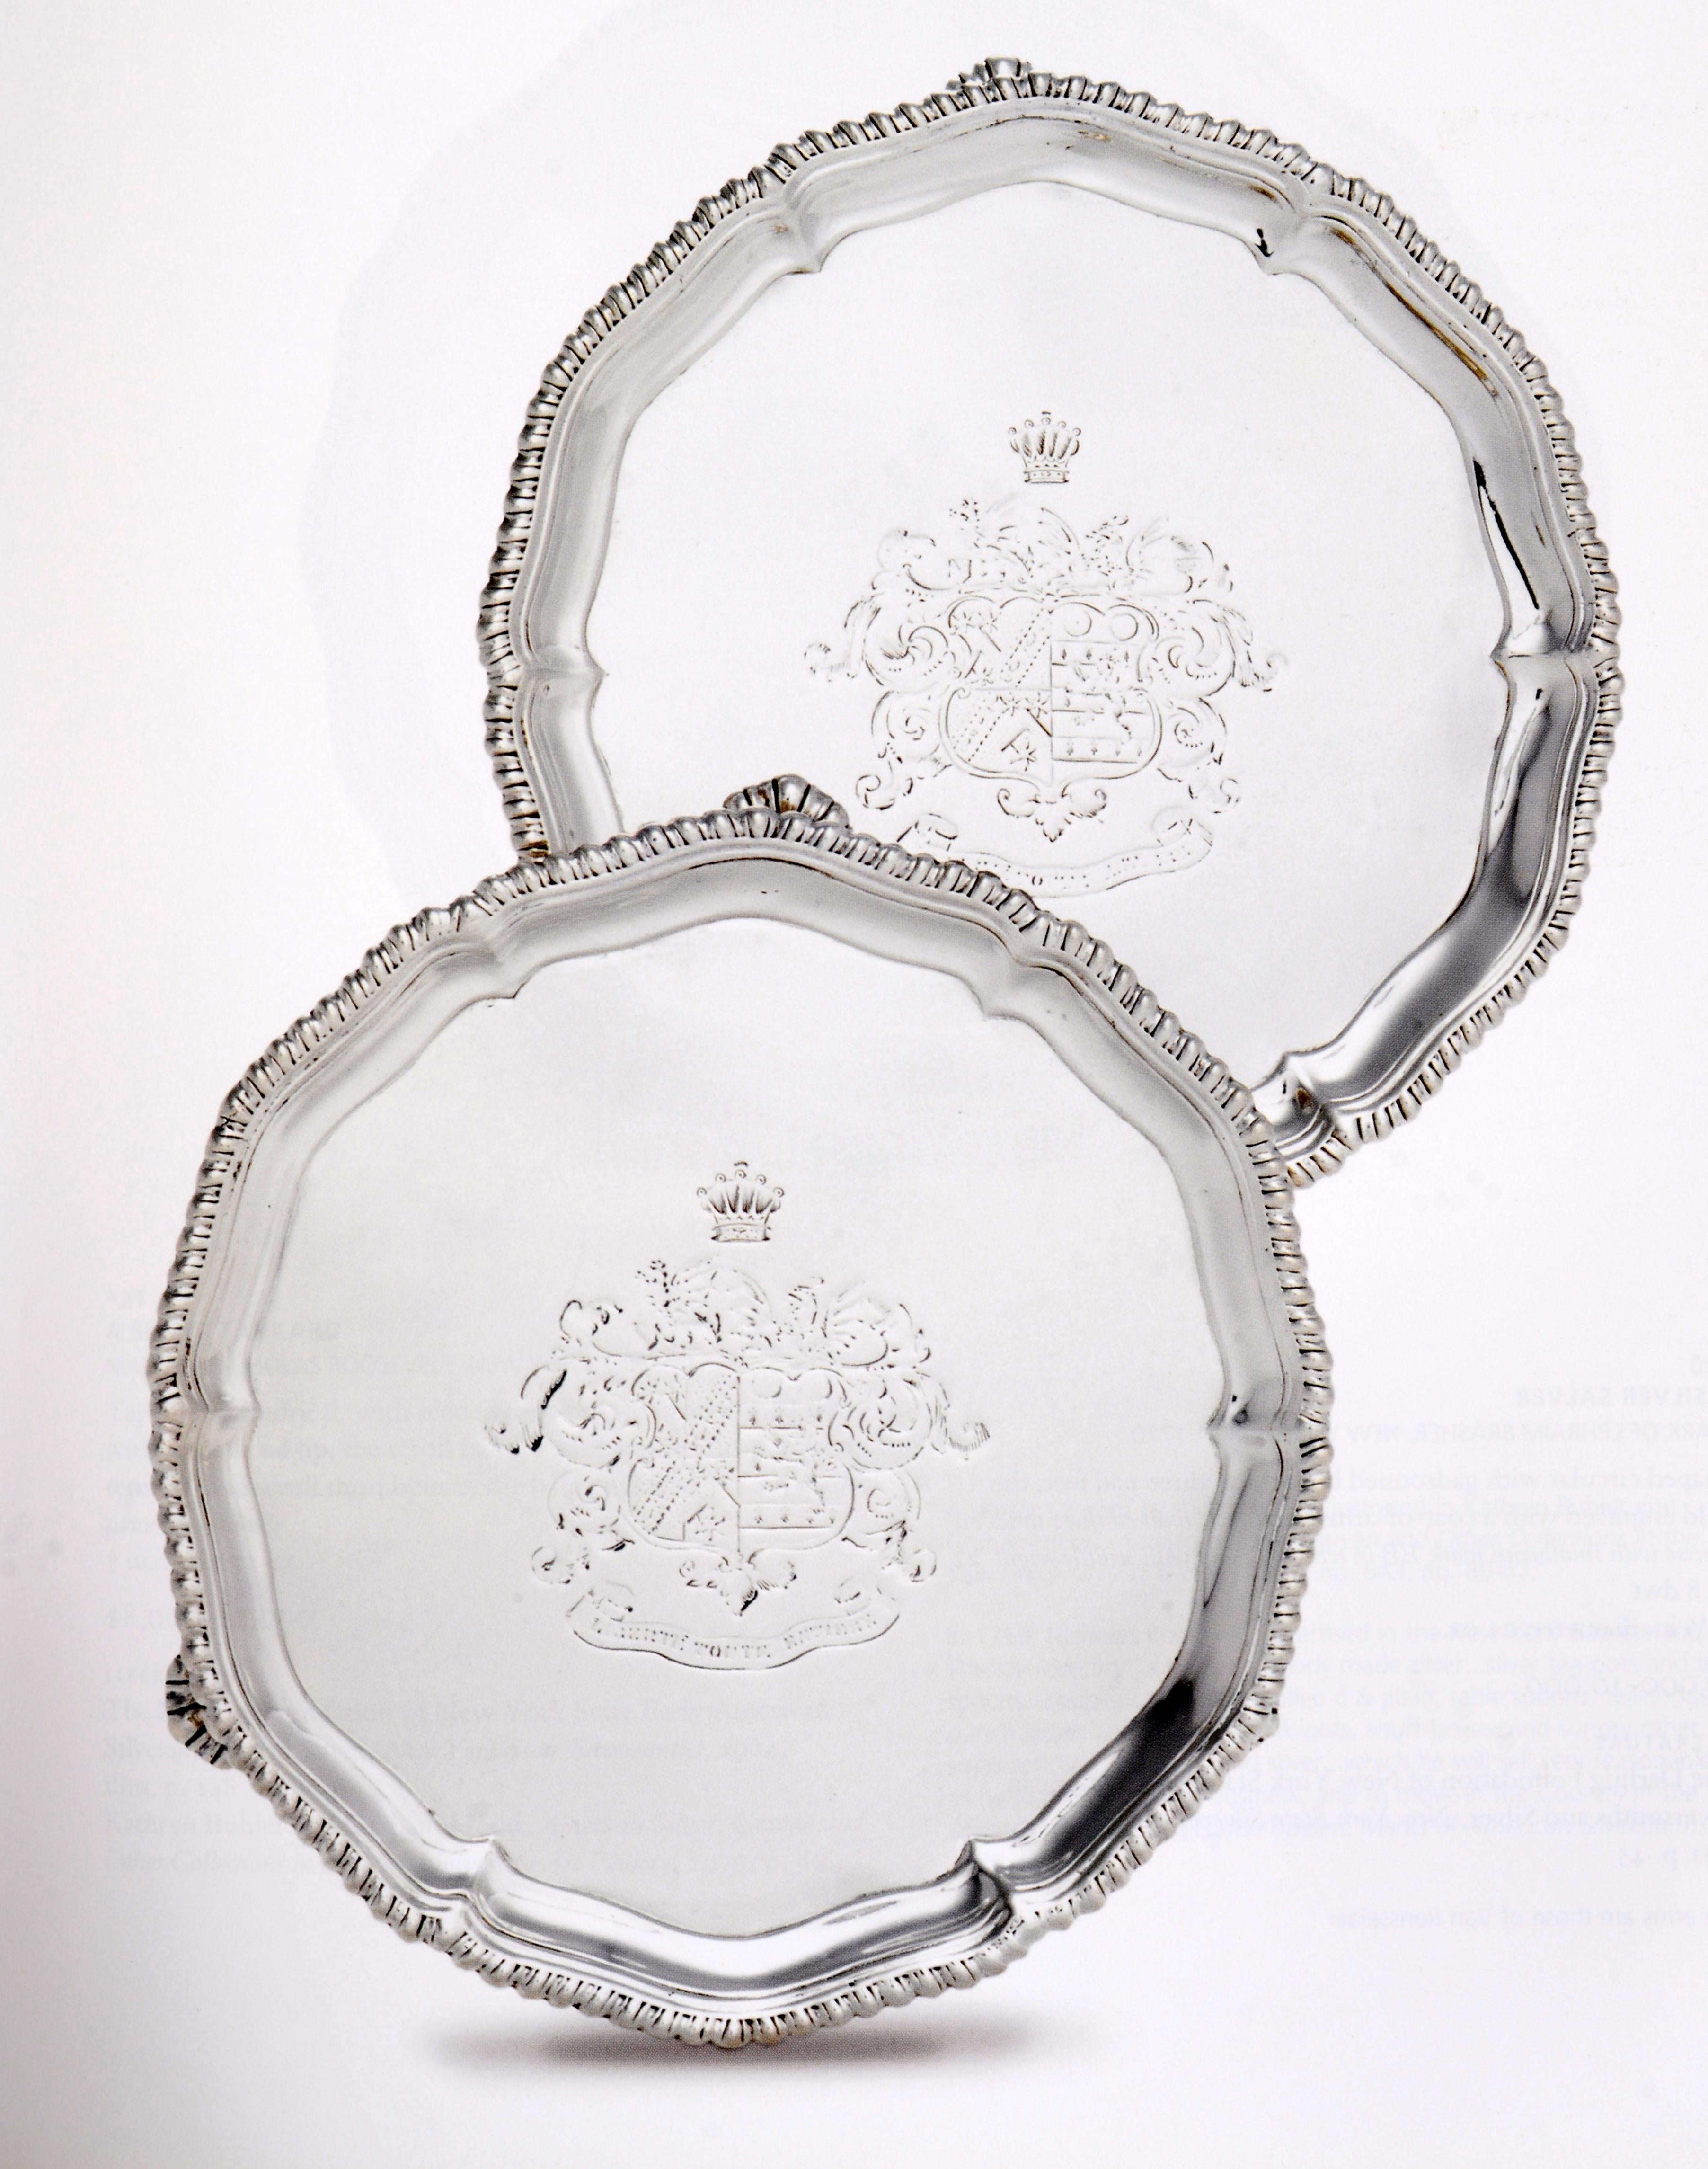 2 Cats. Early American Silver Darling Foundation & Silver Monteith by John Coney For Sale 3